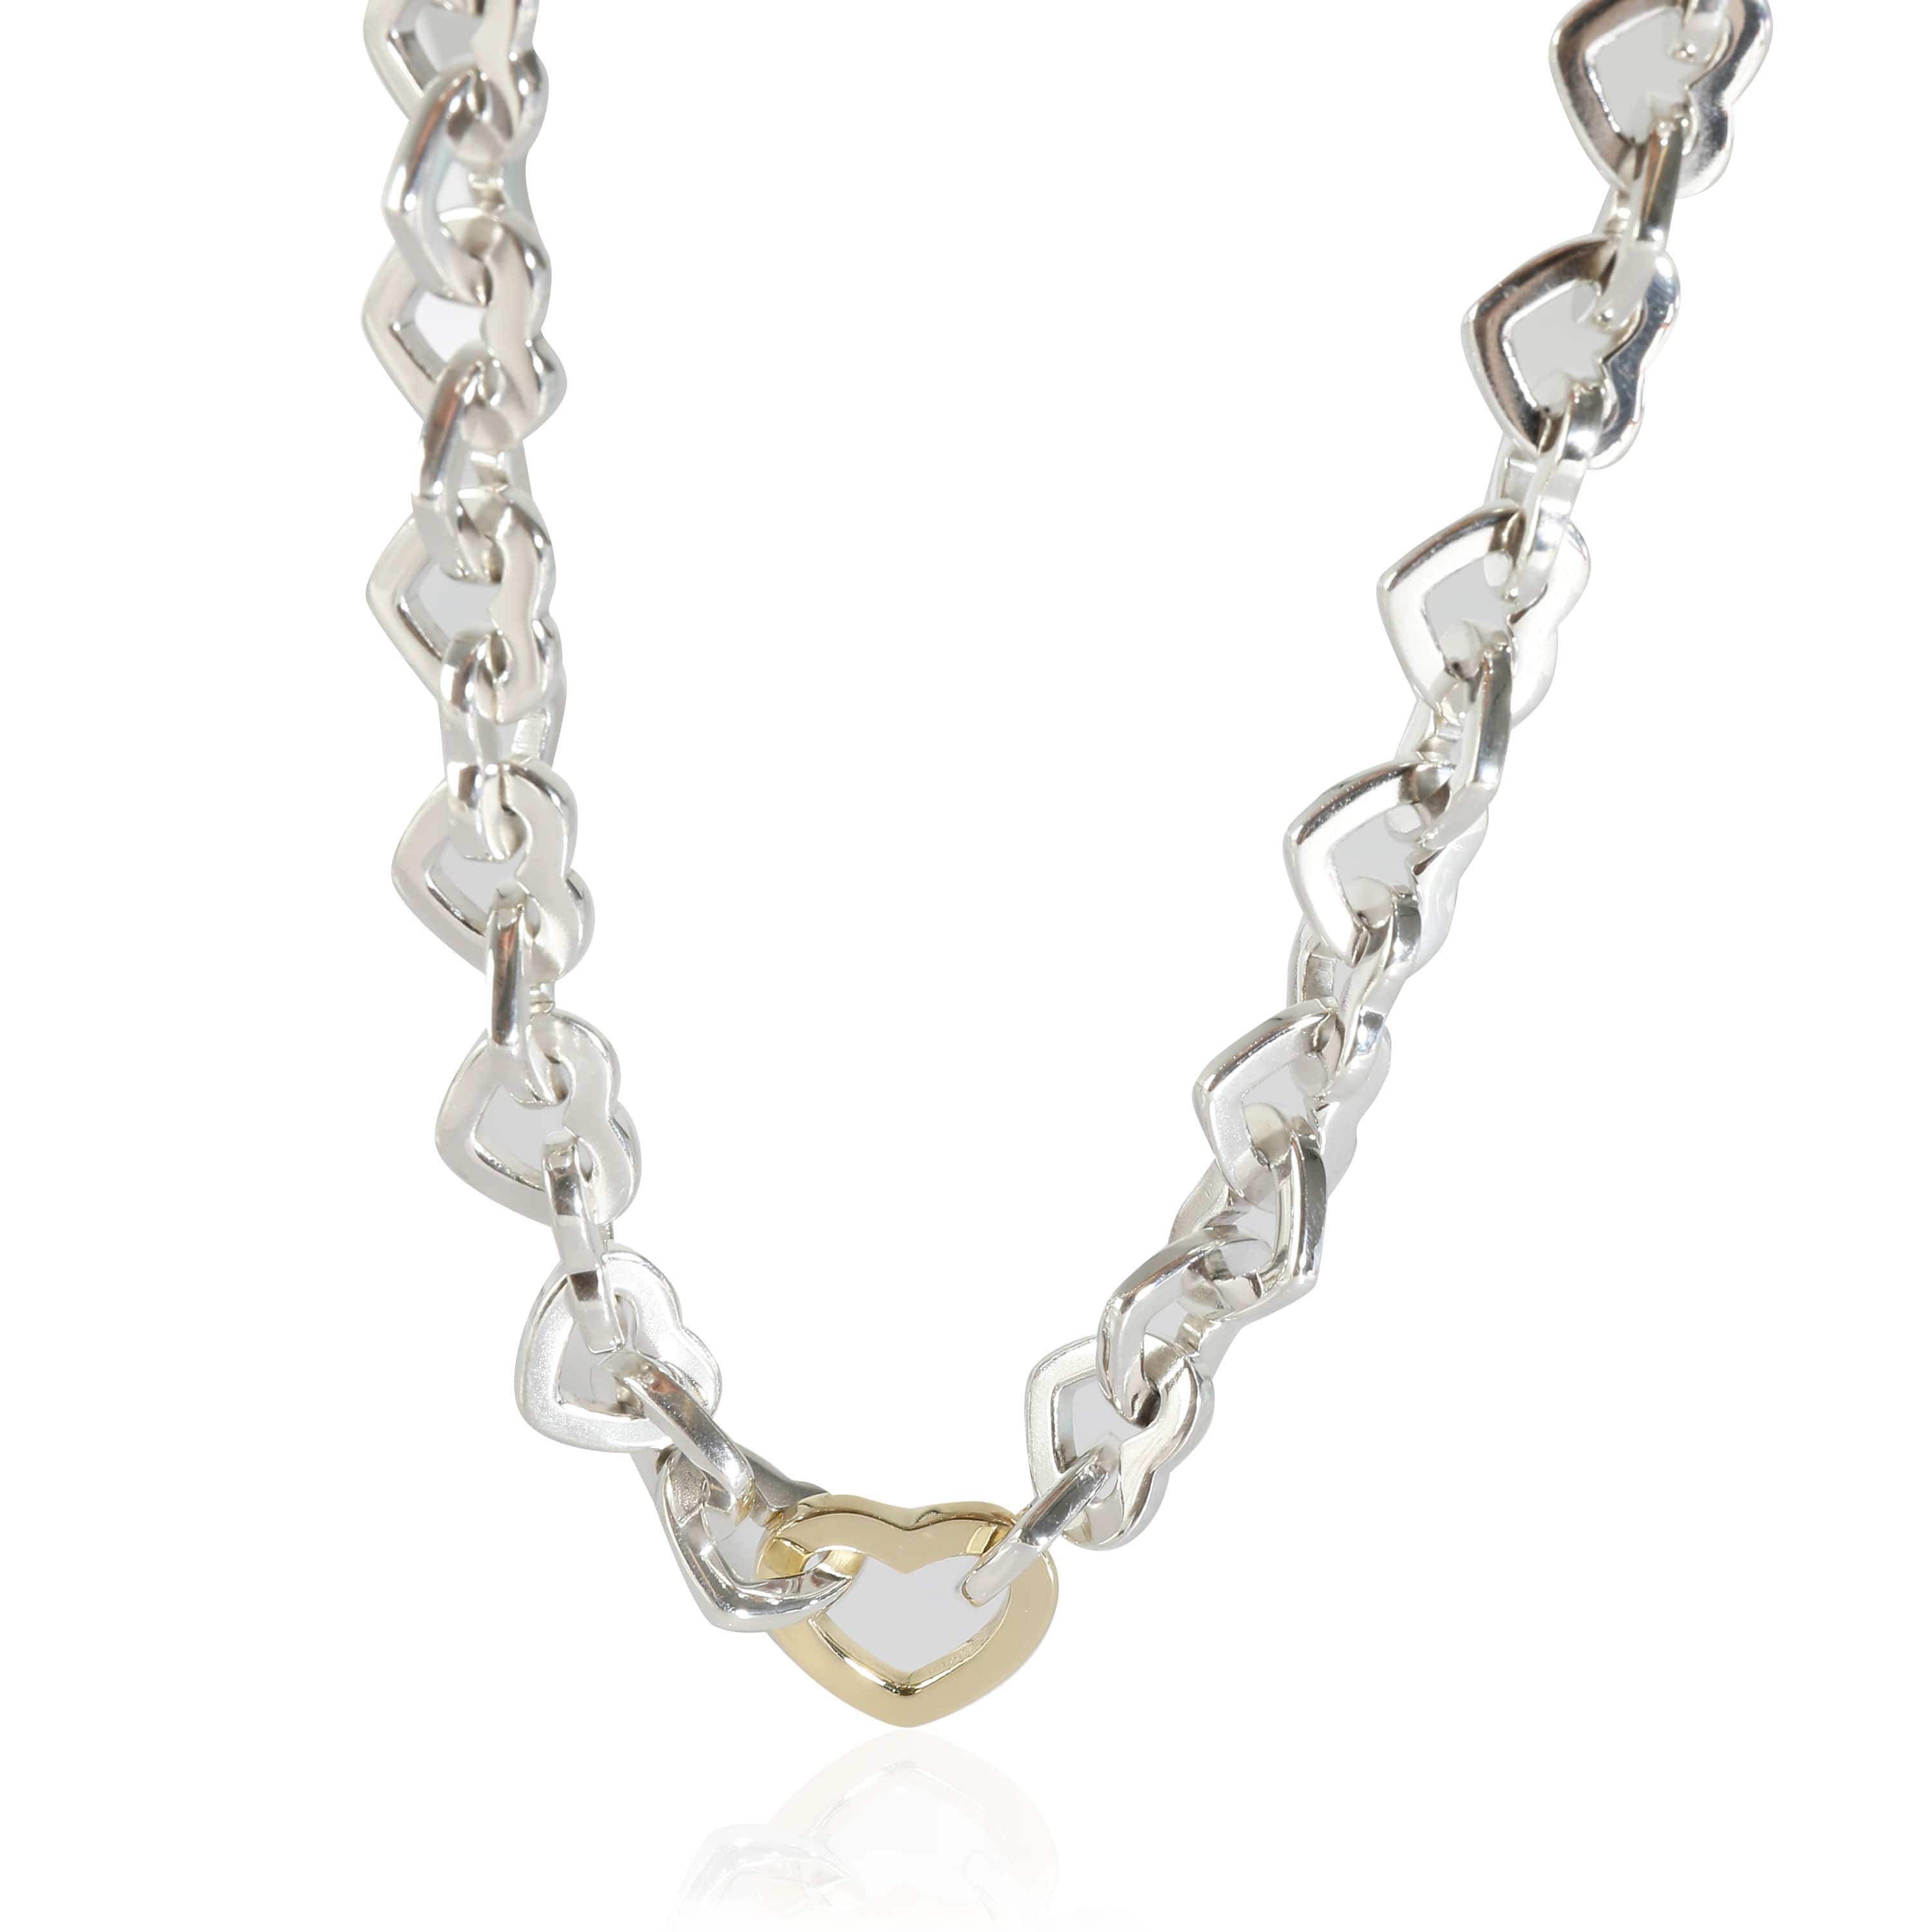 Tiffany & Co. Heart Link Necklace in 18k Yellow Gold/Sterling Silver